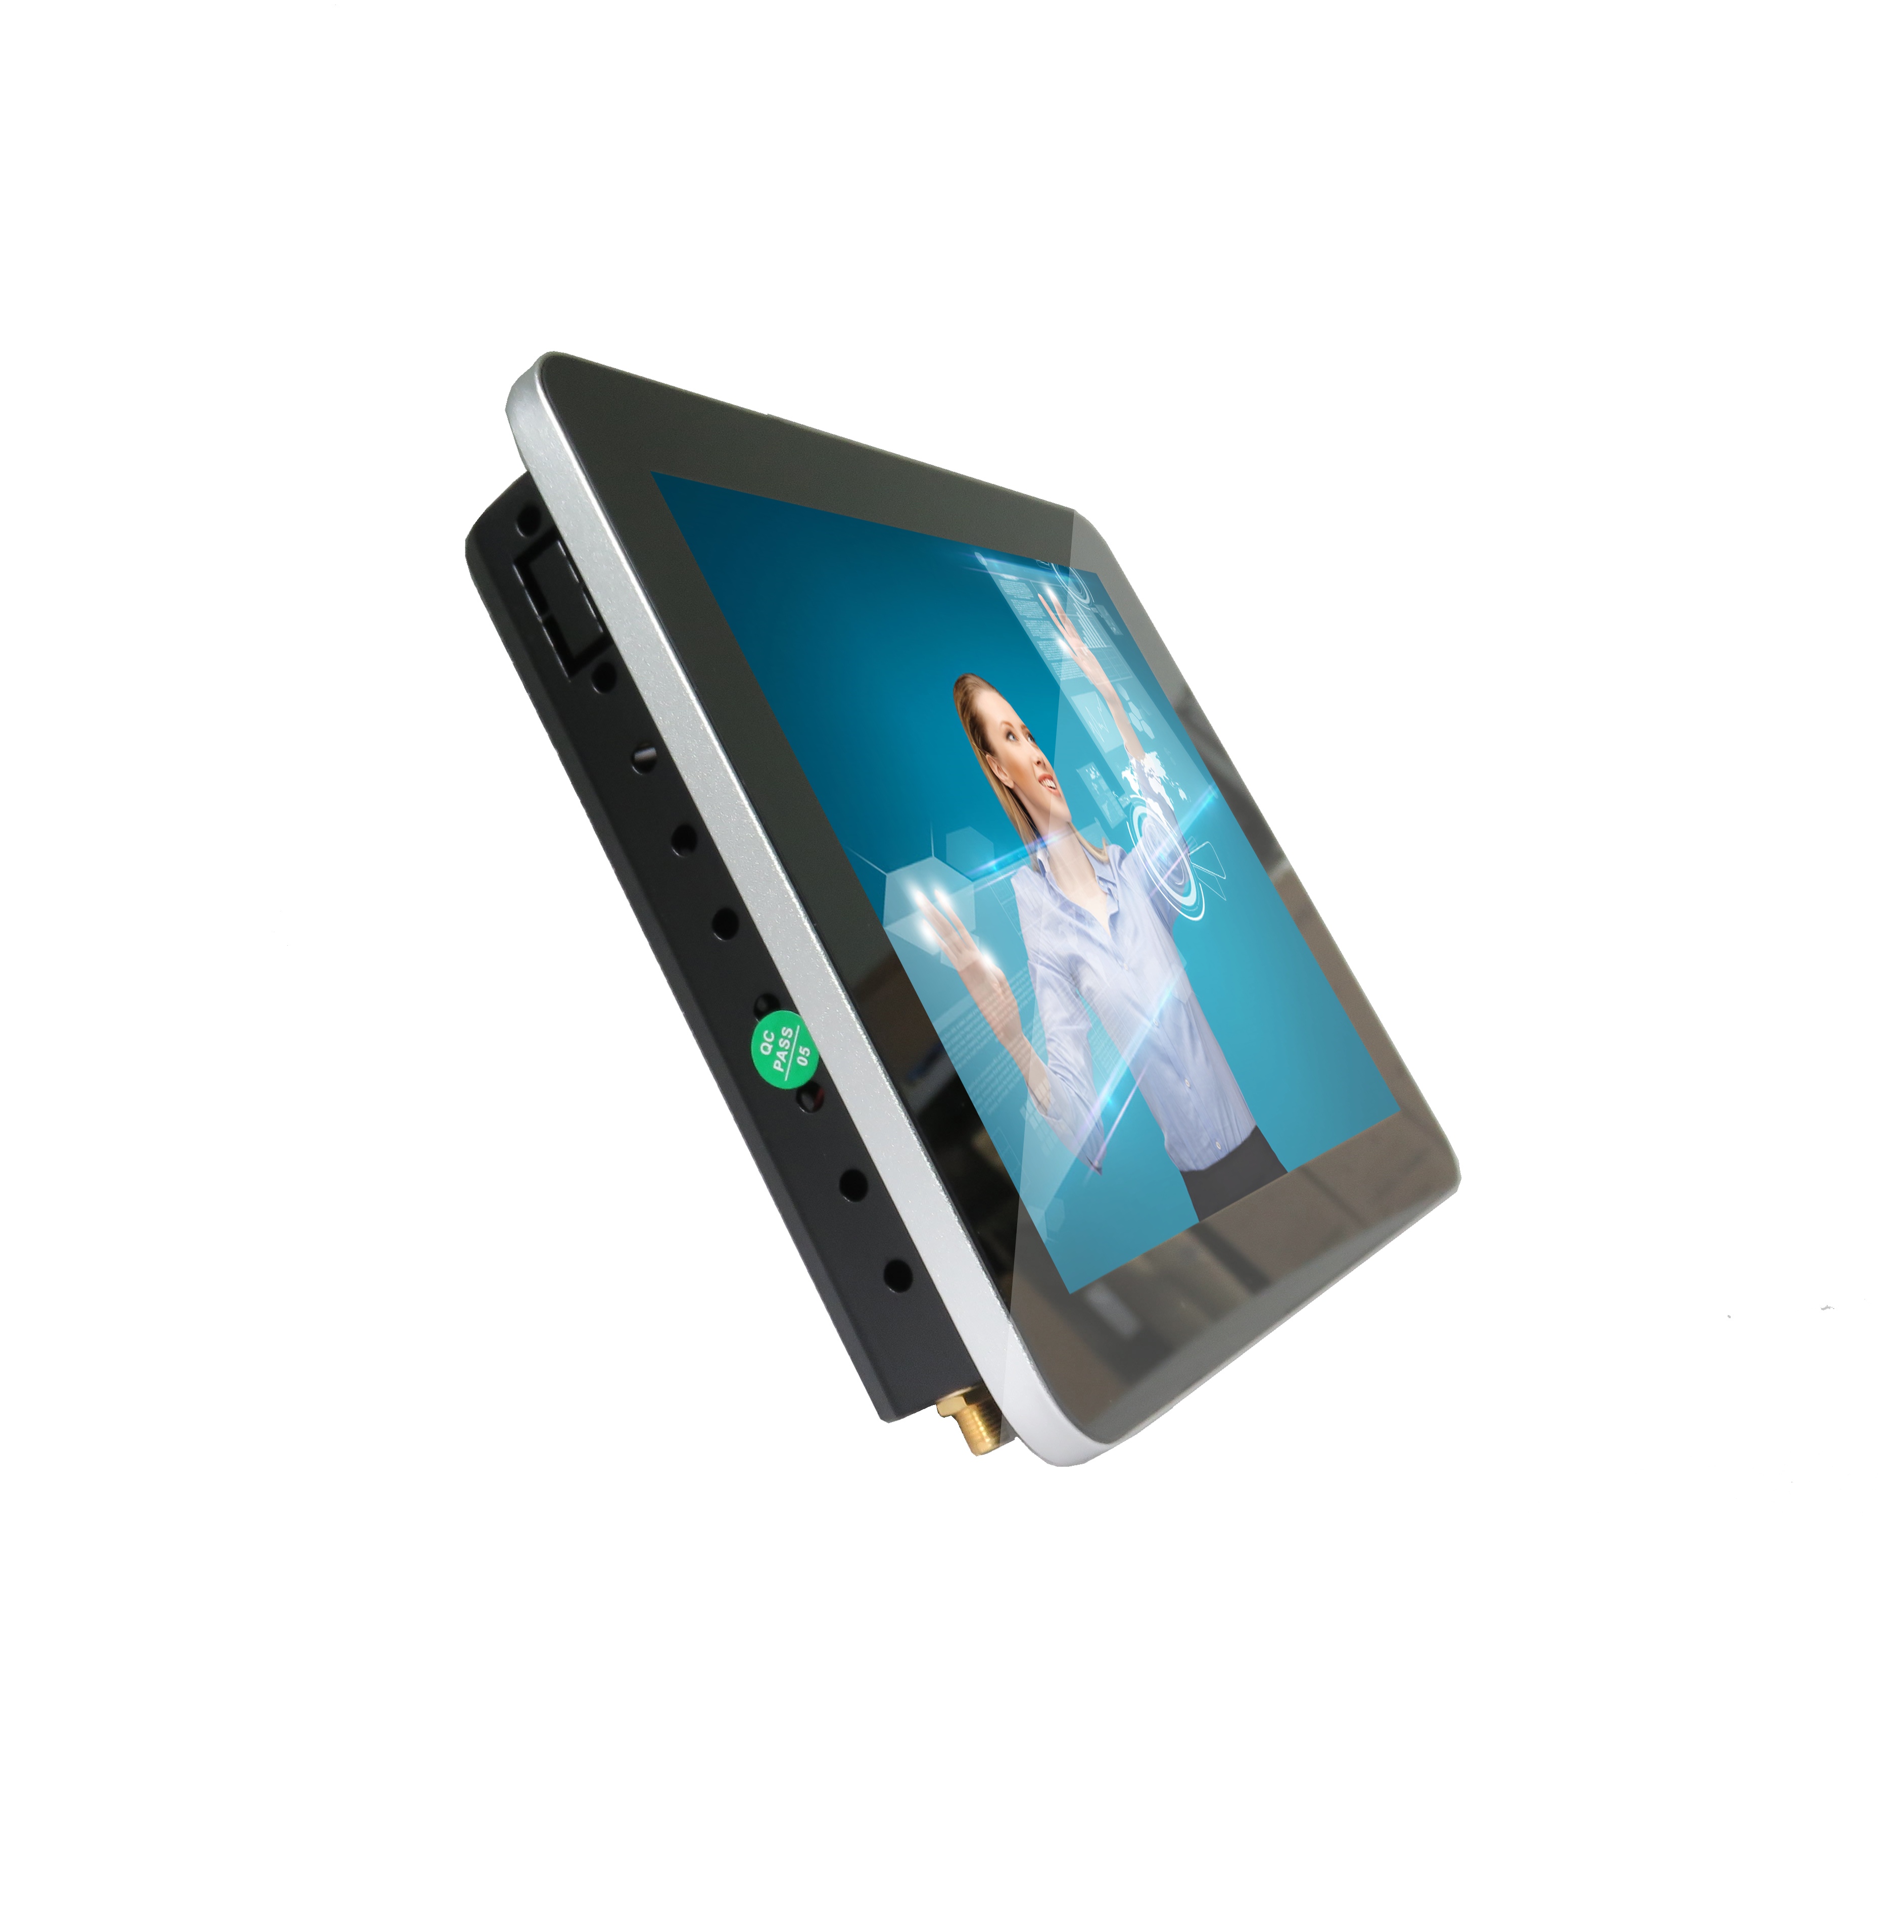 slim 8" touch screen monitor